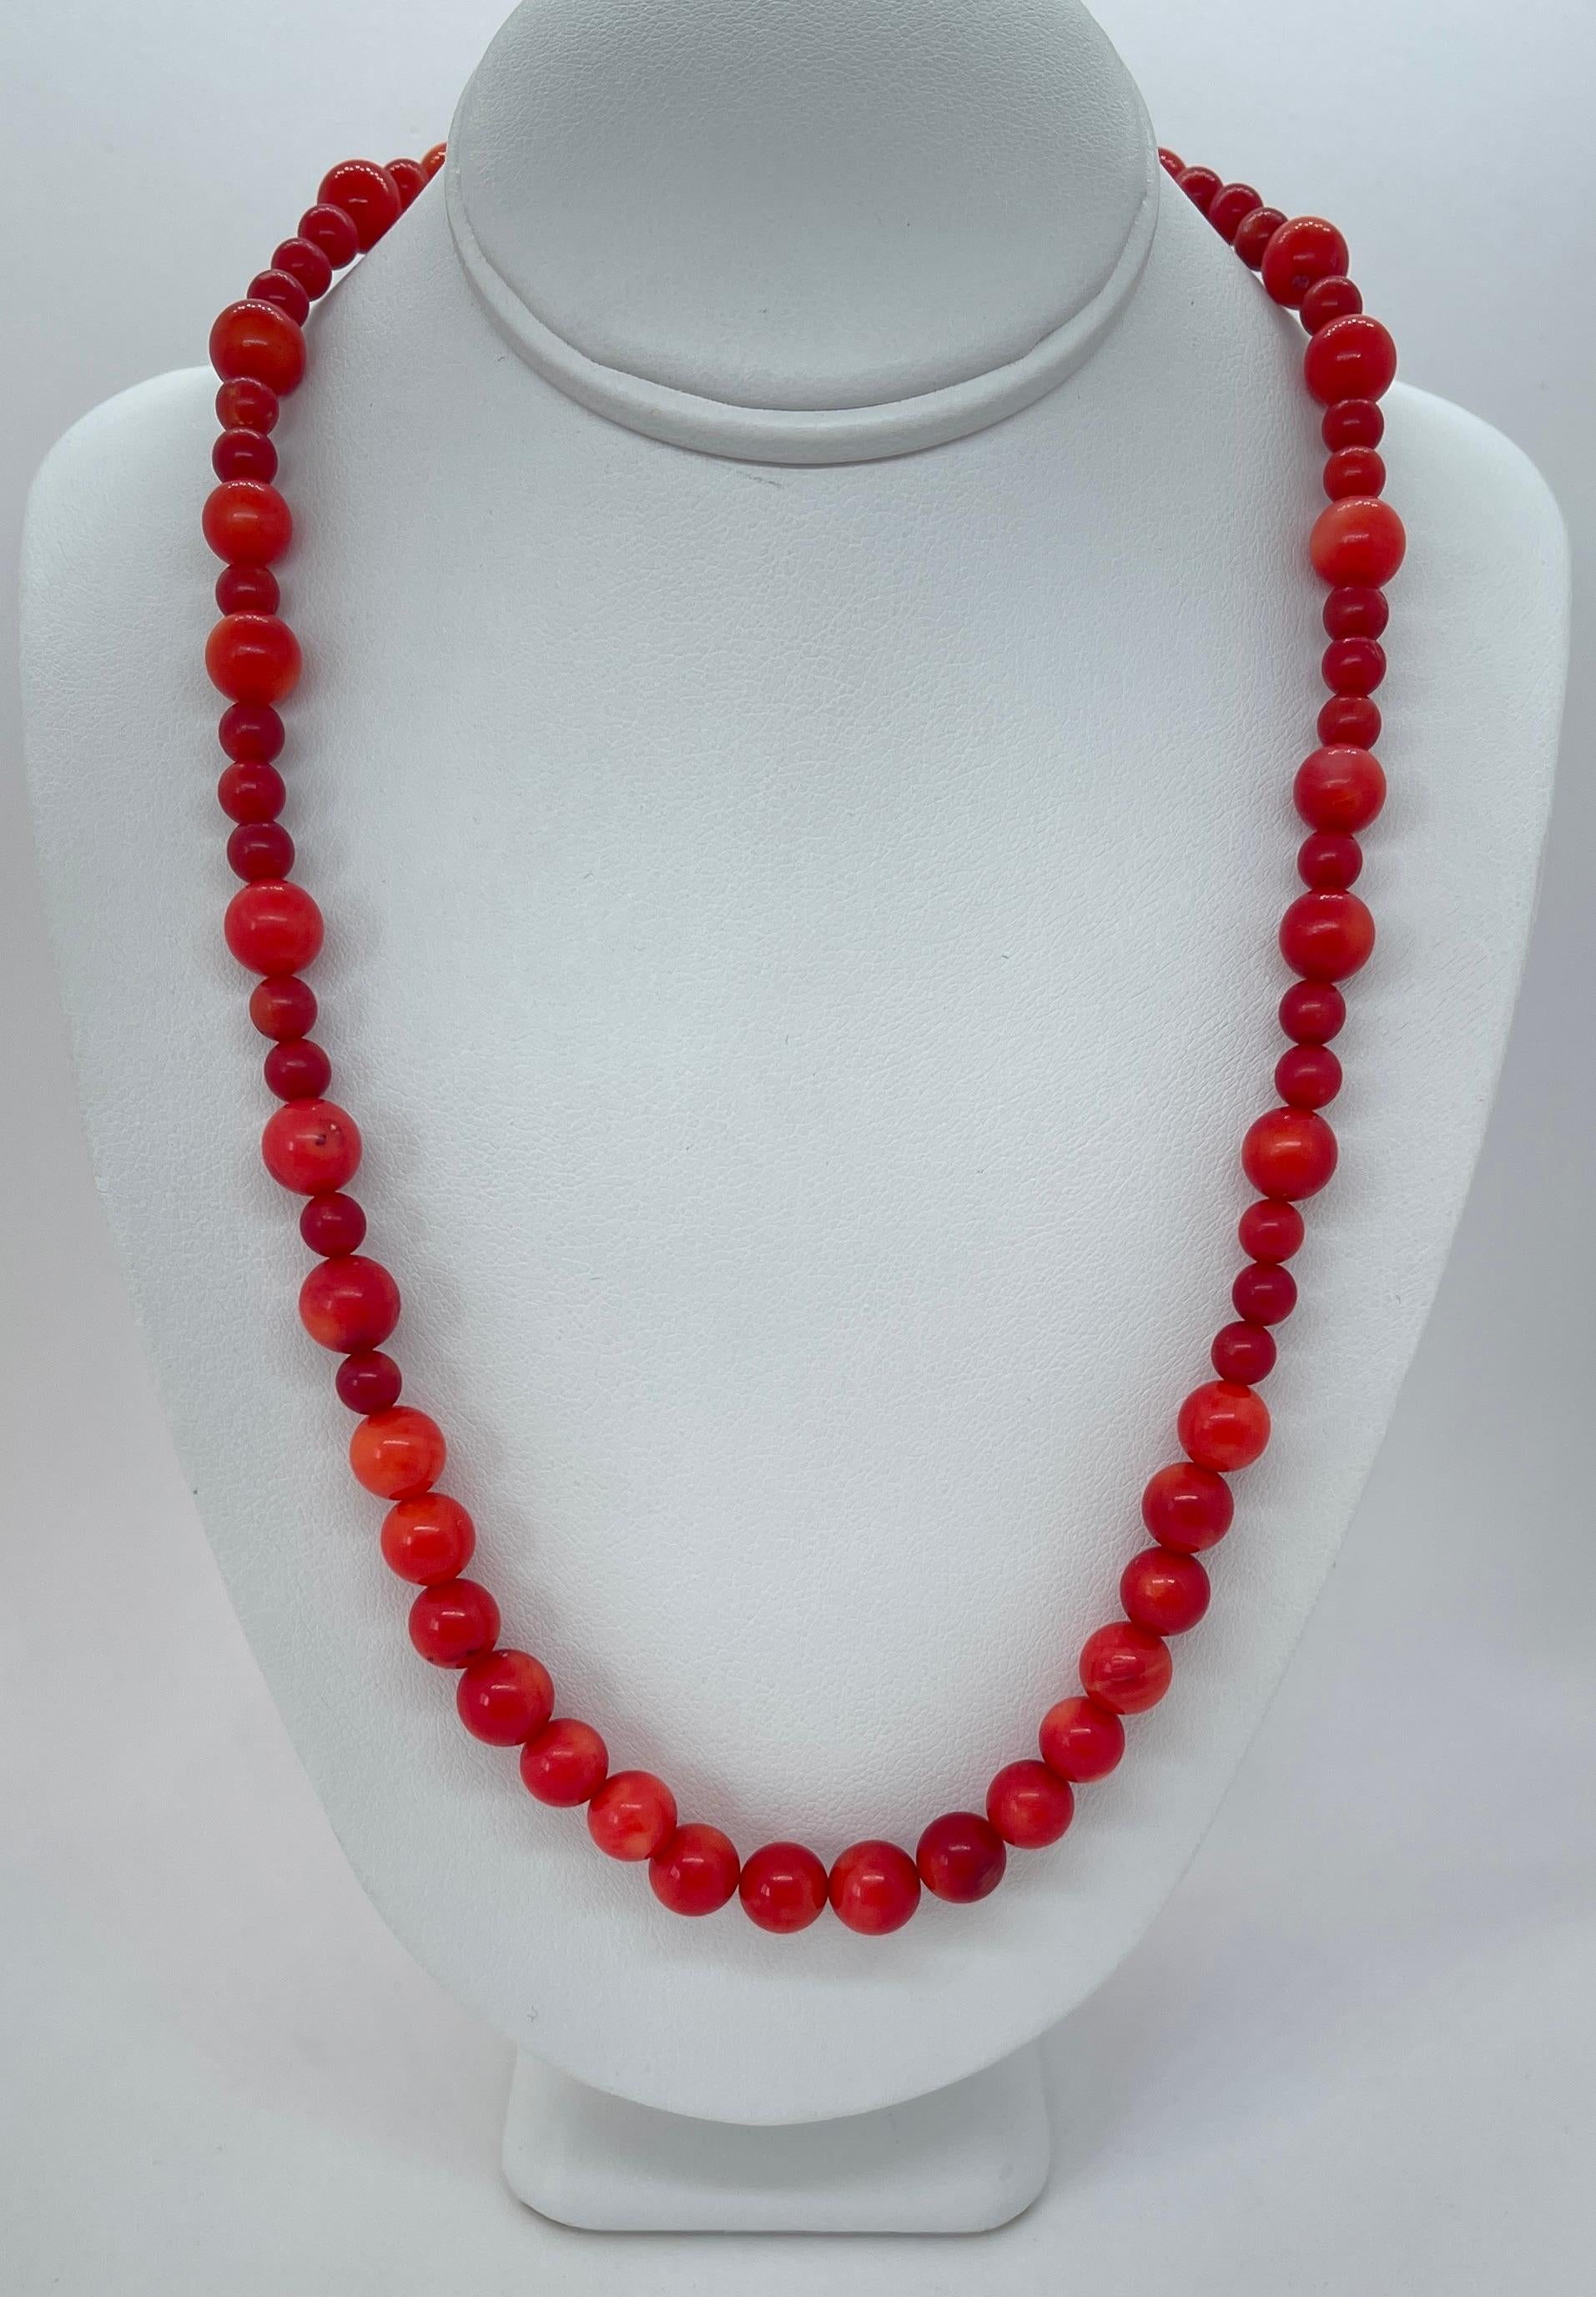 A lovely vintage Coral necklace displaying dark red to medium red tones C1950s.  
The necklace features 16 uniform beads at the front which then graduate to alternating large and small beads (see photos).  
It's approximately 80cms long and just